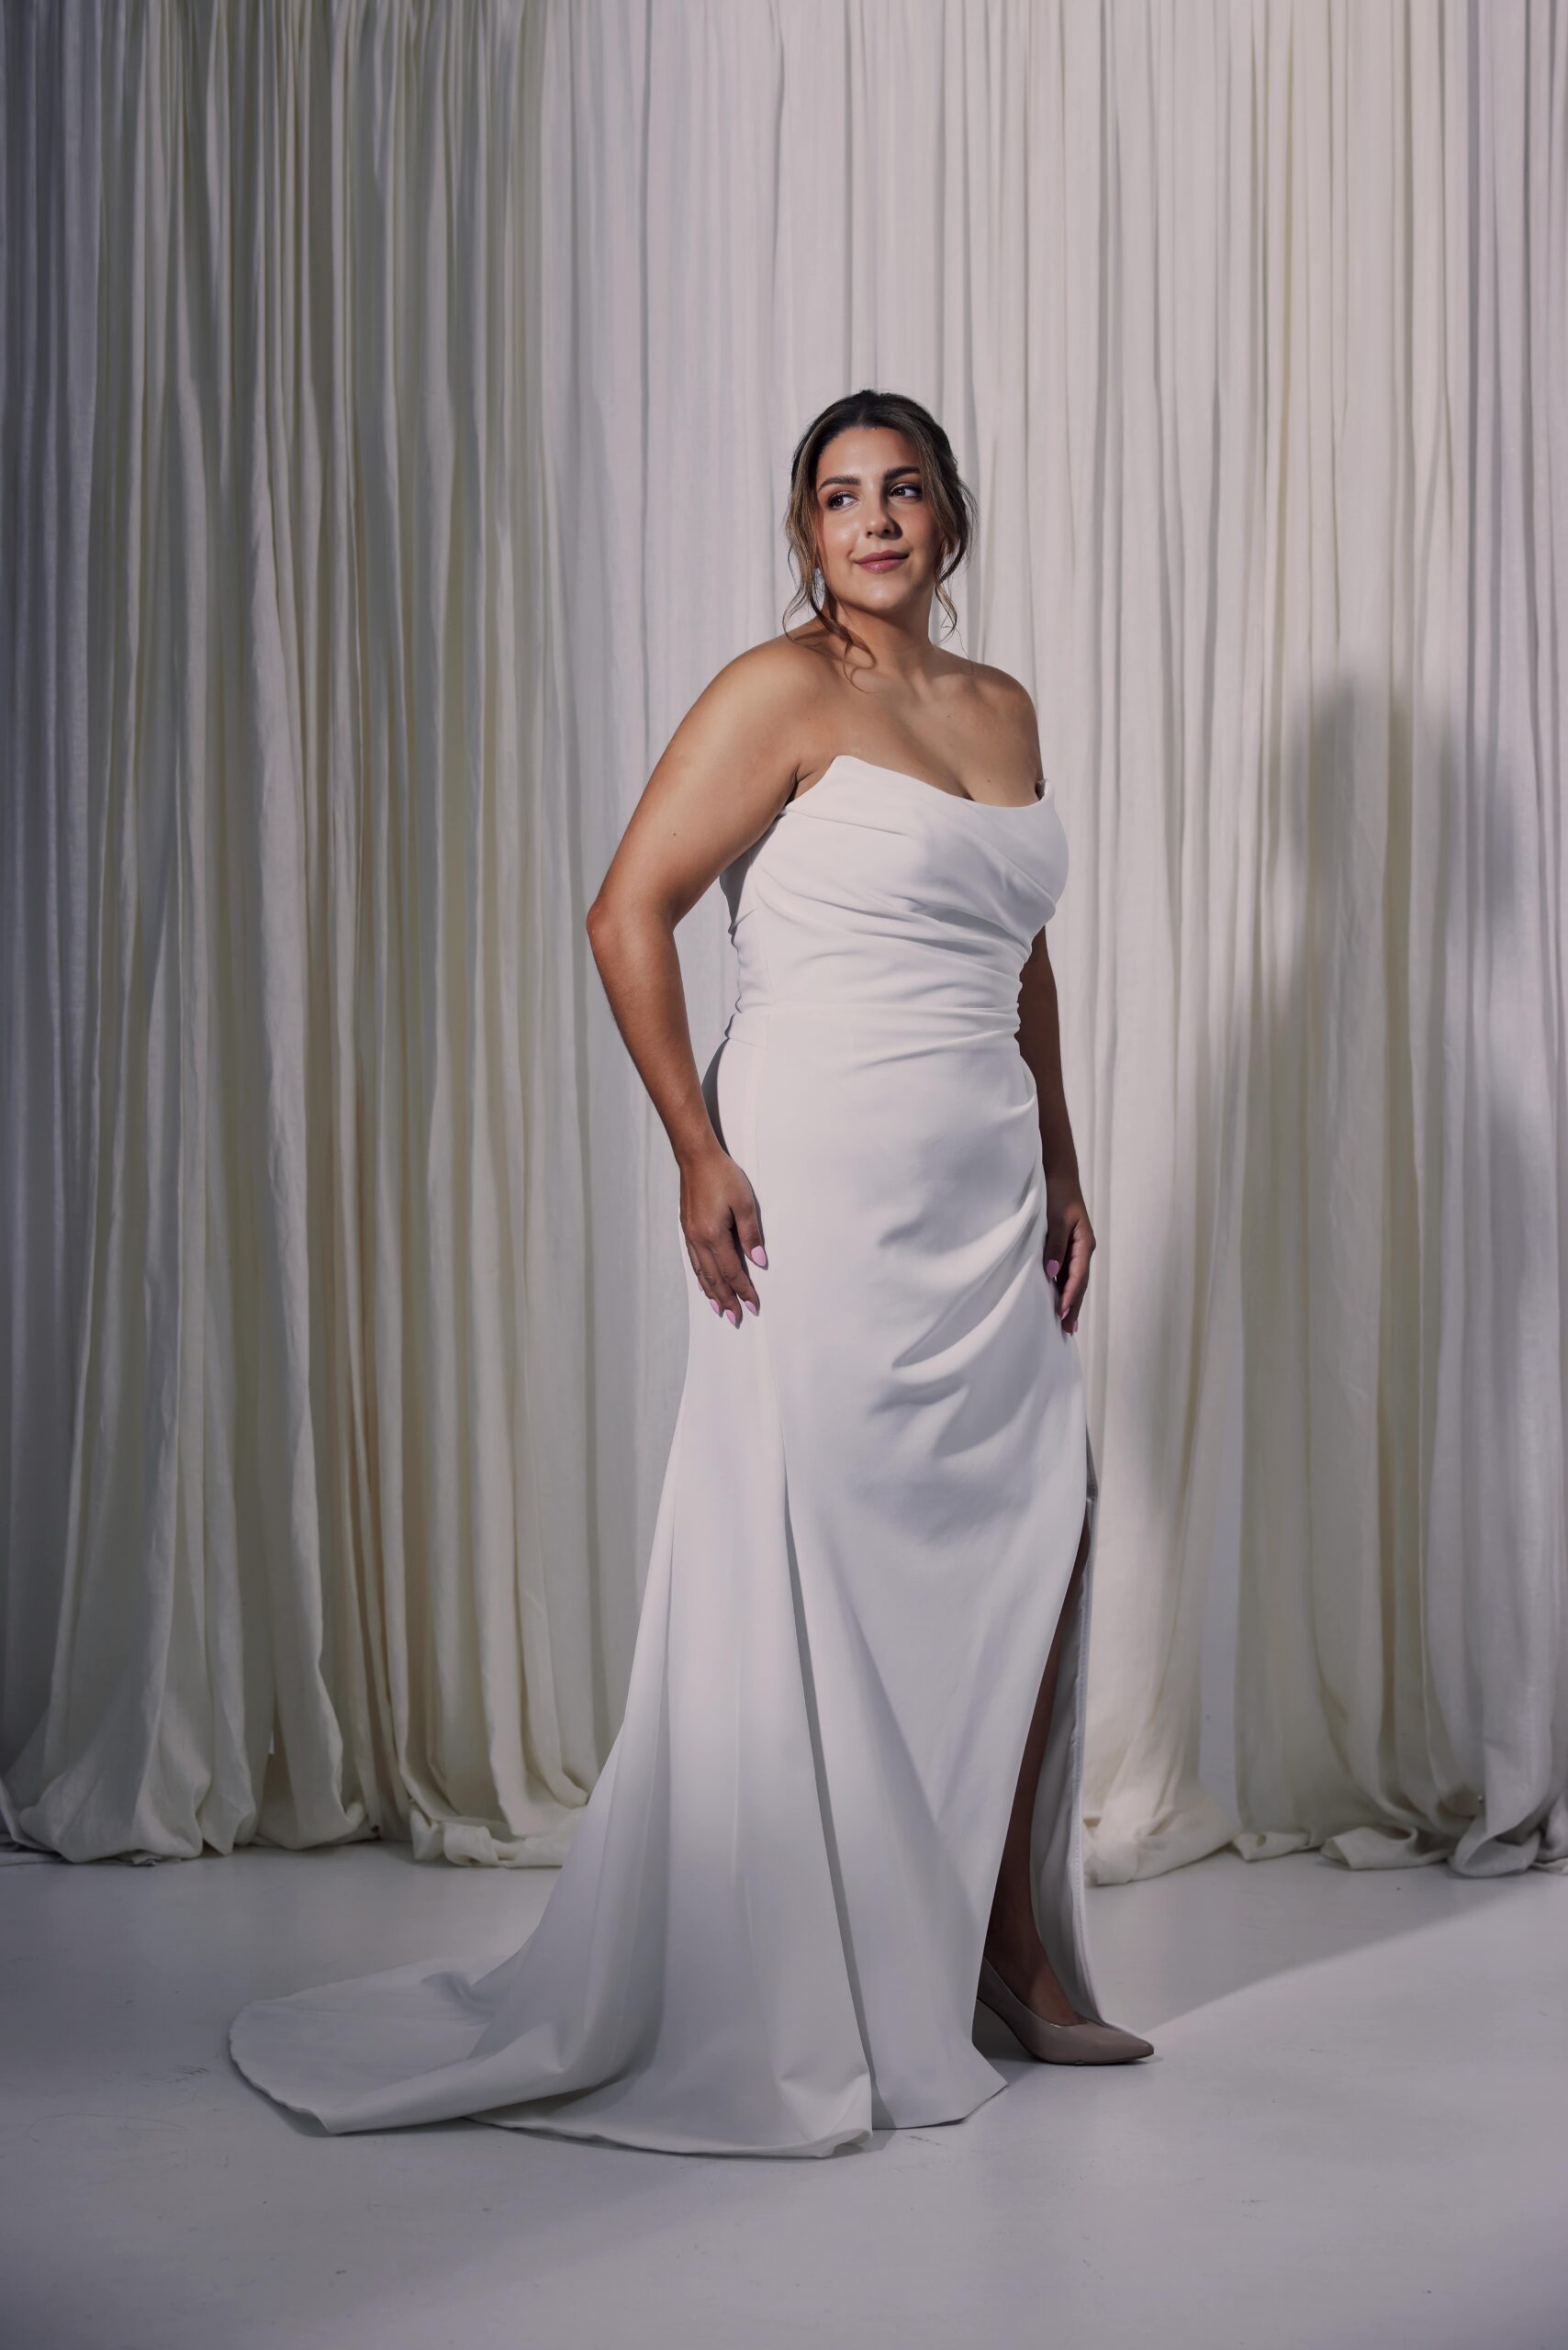 The Carol gown - a fitted gown with draping, scoop neckline and a side split.